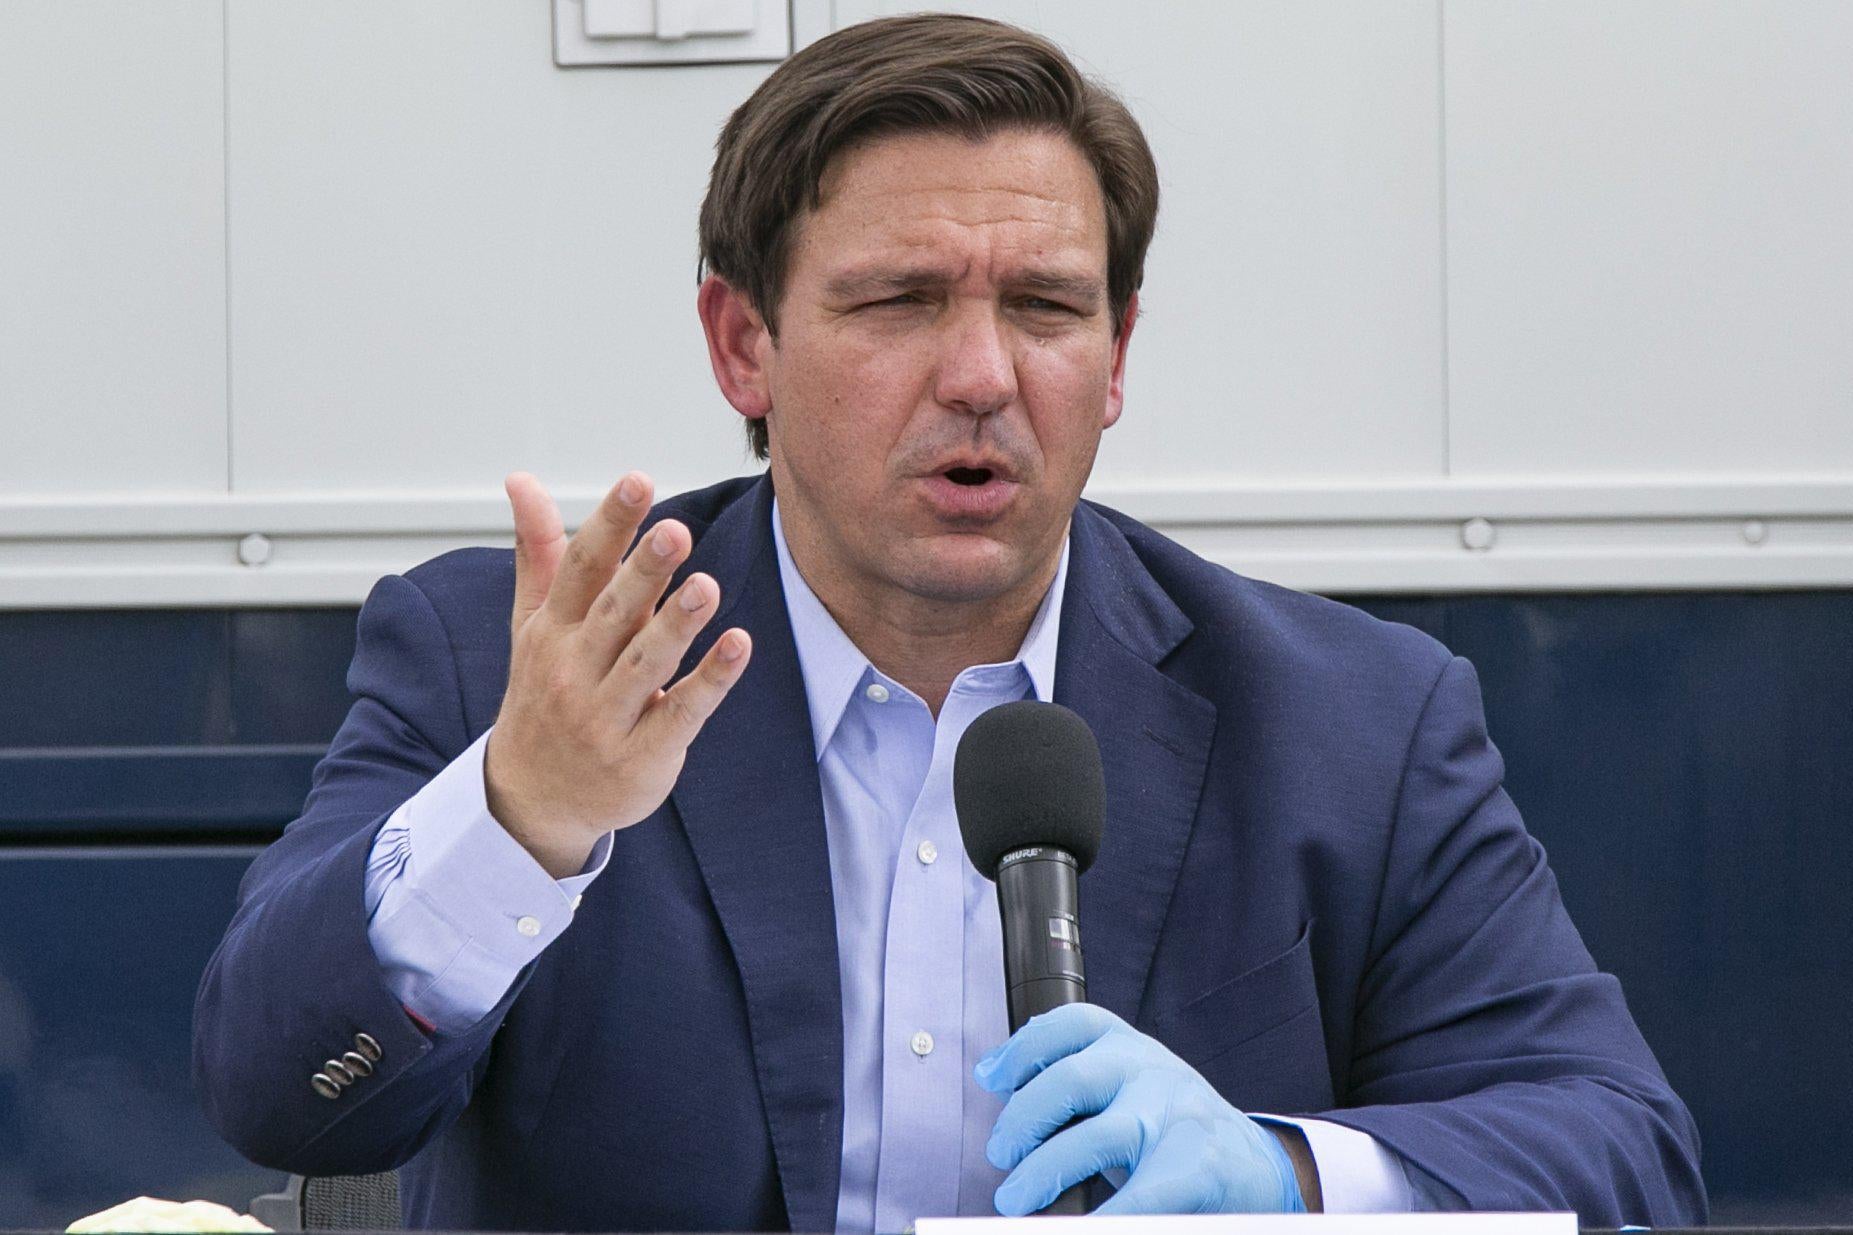 Ron DeSantis speaks and holds a mic with a gloved hand.